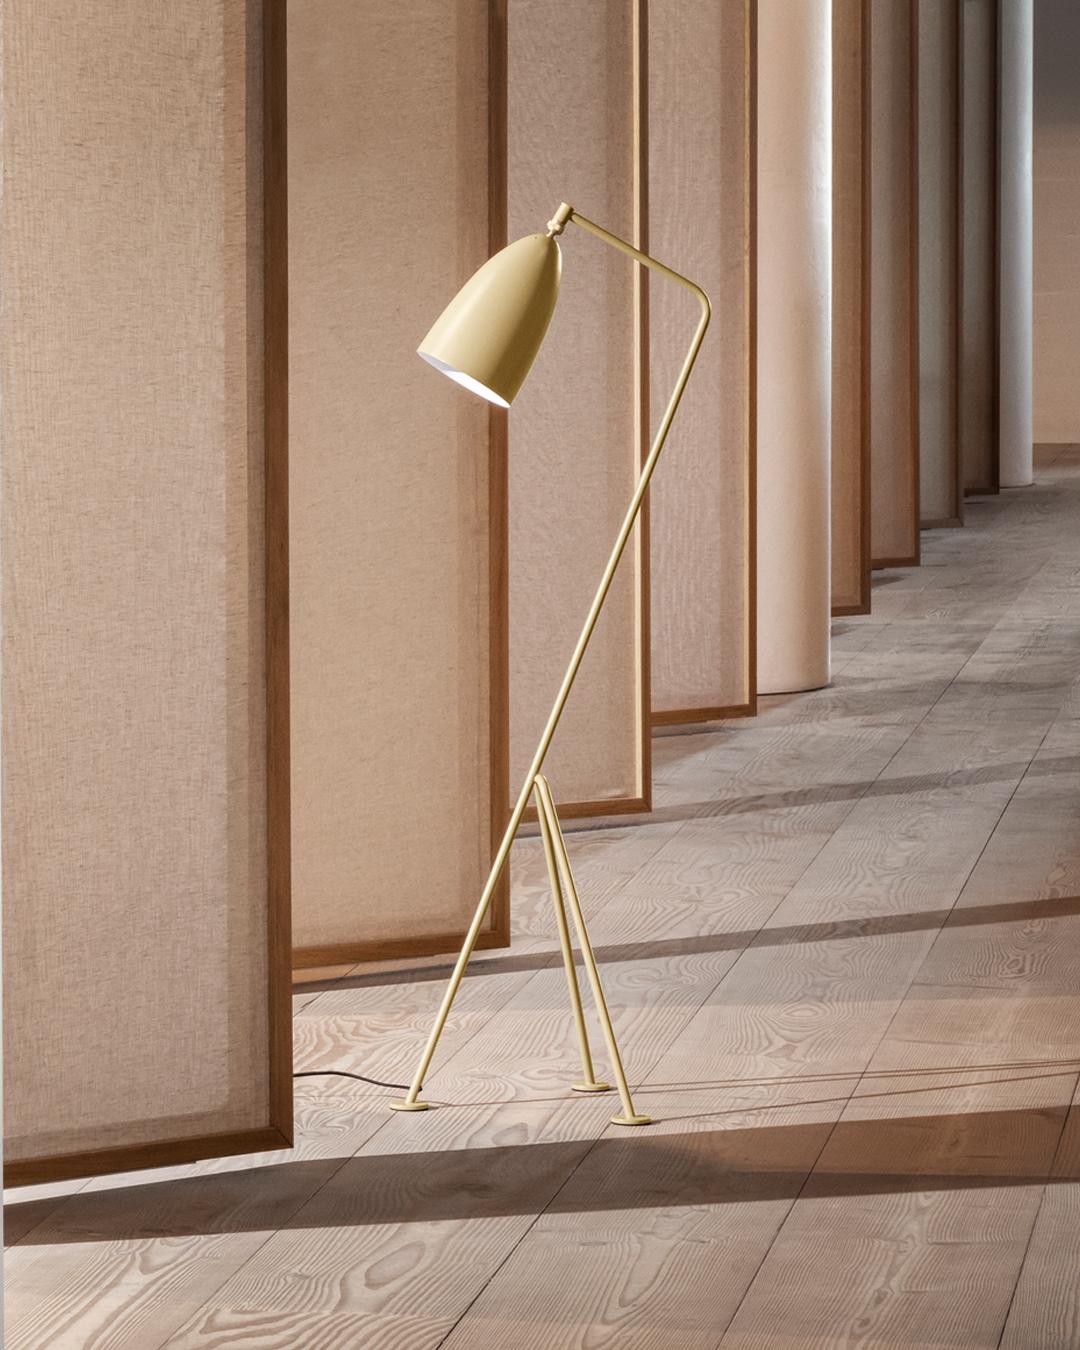 Greta Magnusson Grossman 'Grasshopper' floor lamp in olive brown. Designed in 1947 by Grossman, this is an authorized re-edition by GUBI of Denmark who meticulously reproduces her work with scrupulous attention to detail and materials that are